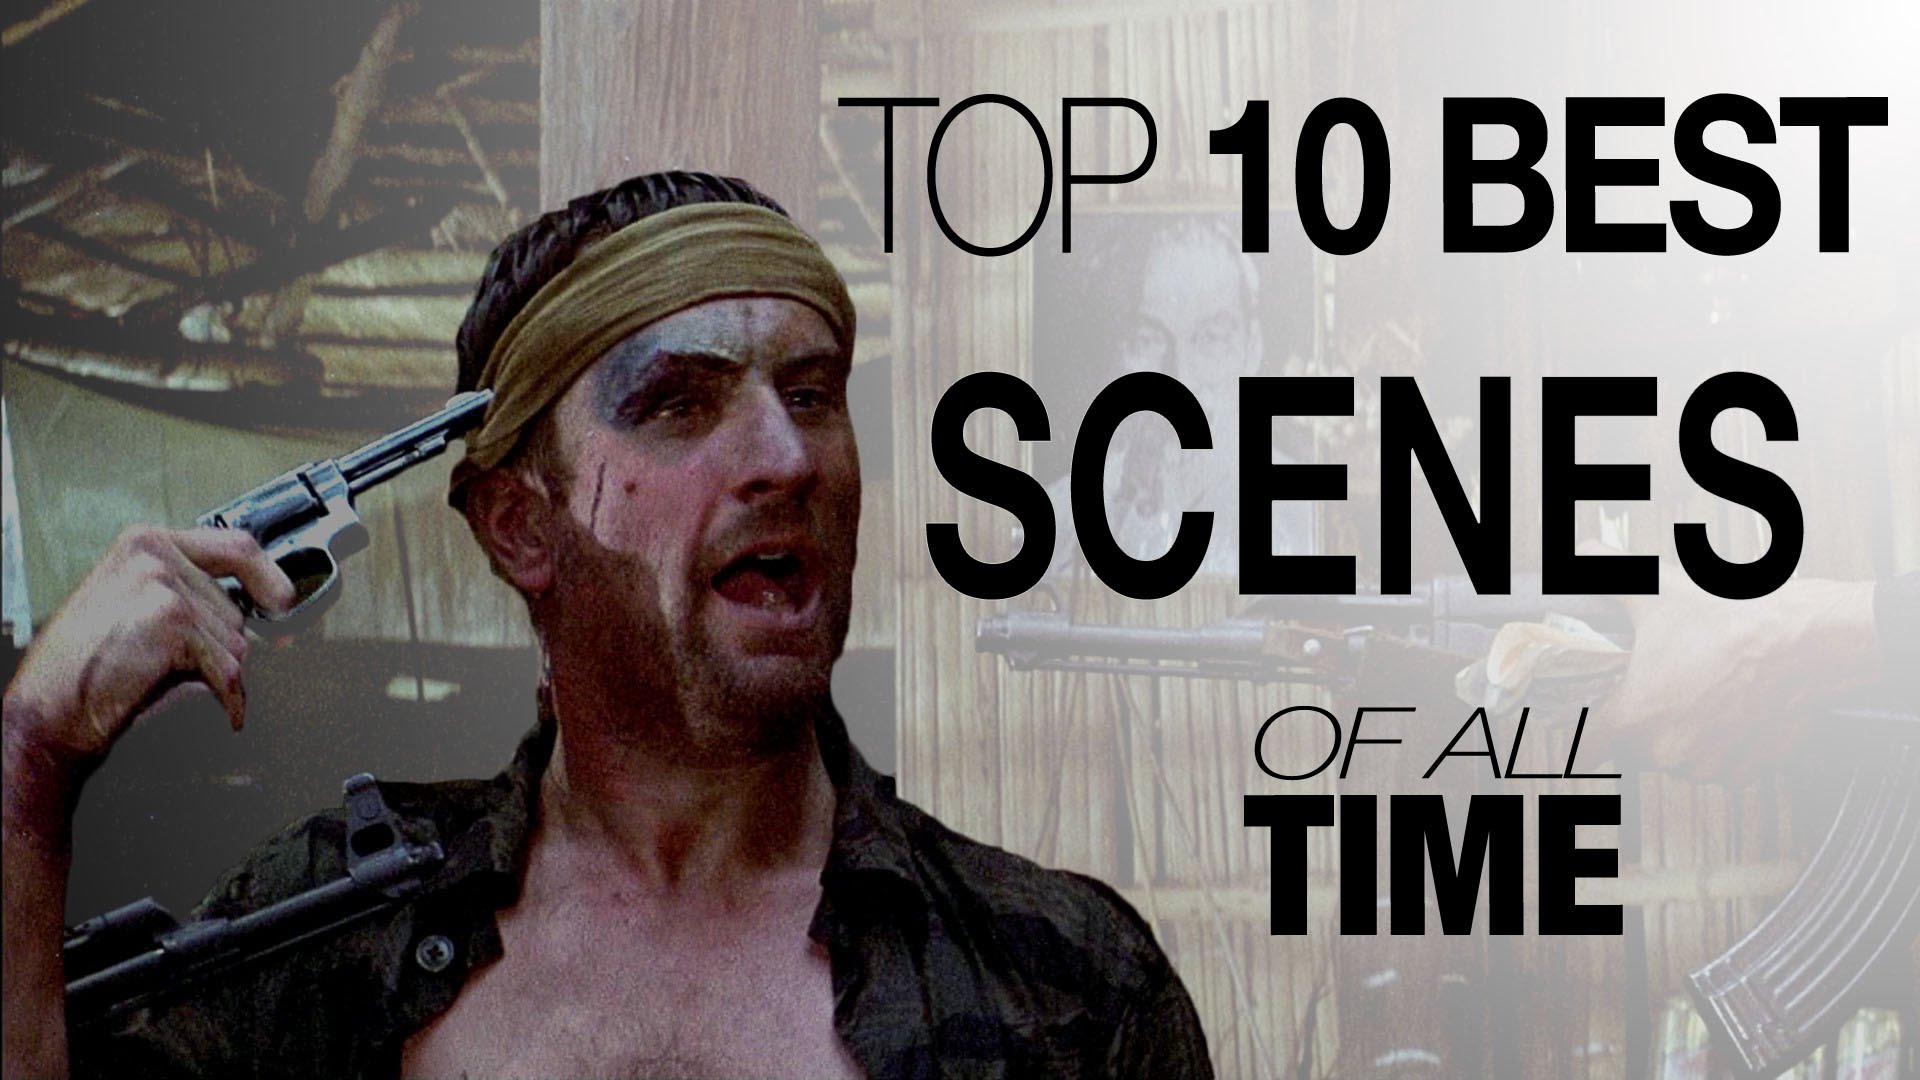 Top 10 Best Scenes of All Time | Top Entertainment News